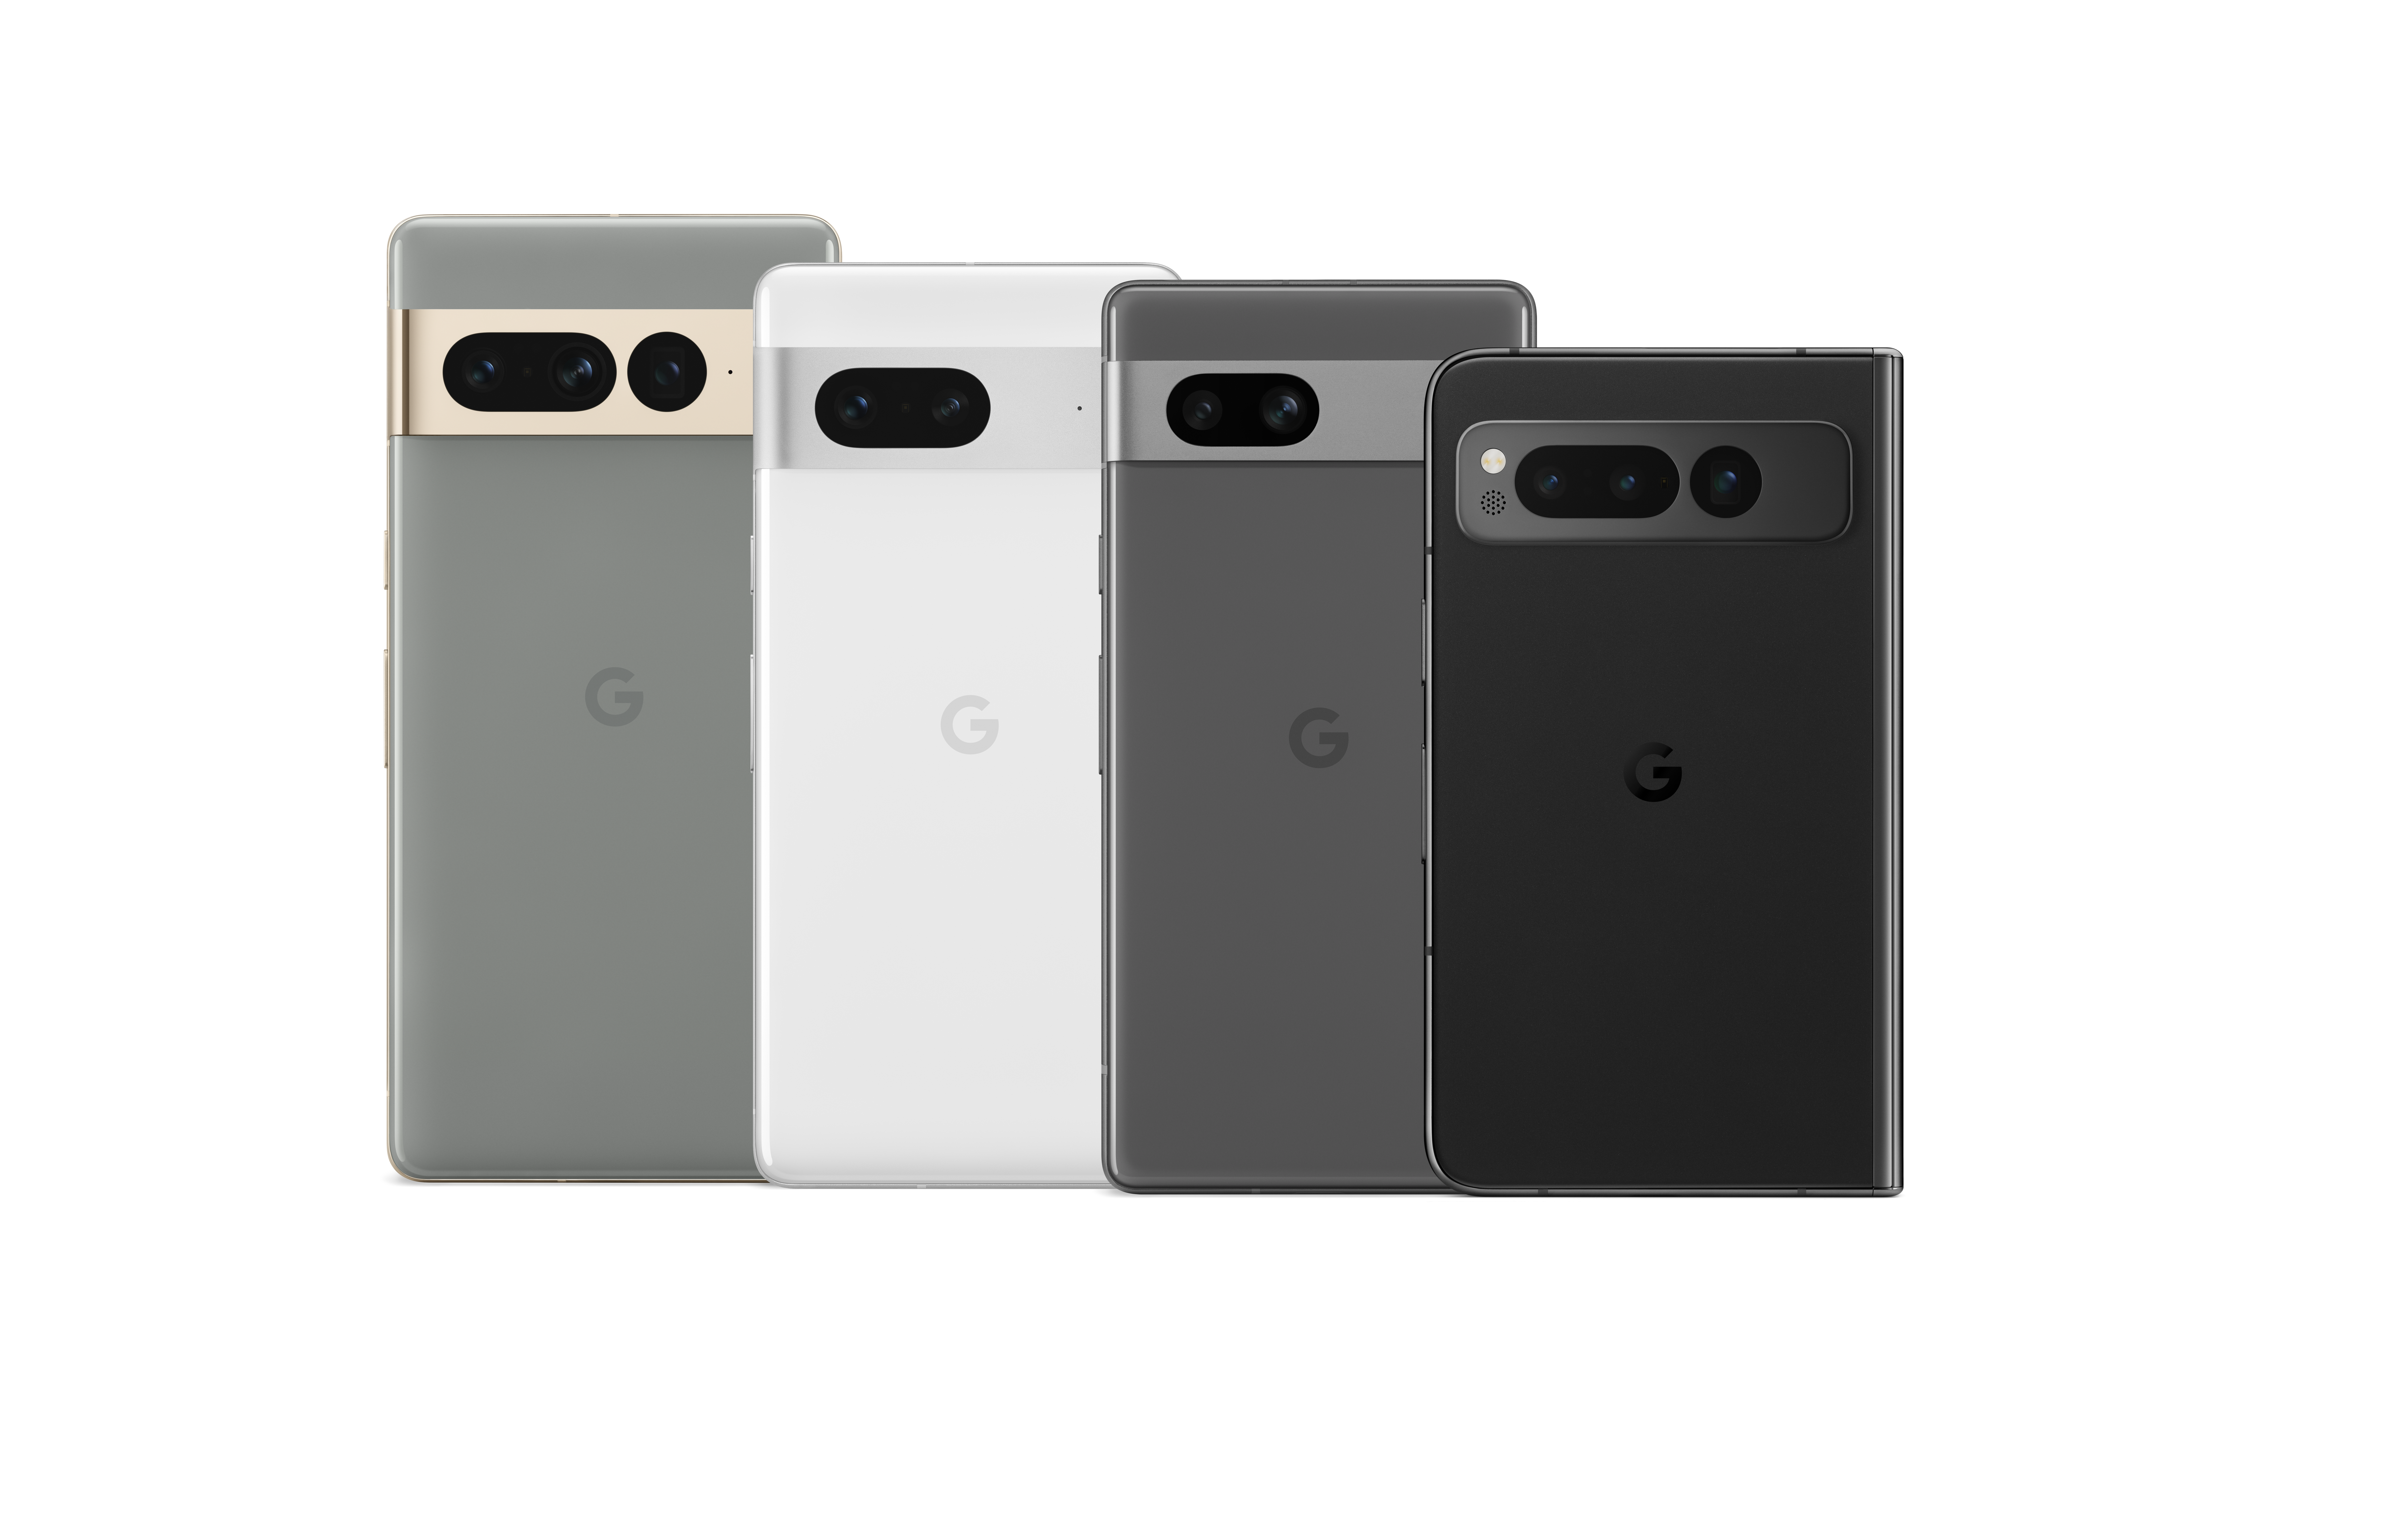 Image of Google Pixel 7a, 7, 7 Pro and Pixel Fold over white background.